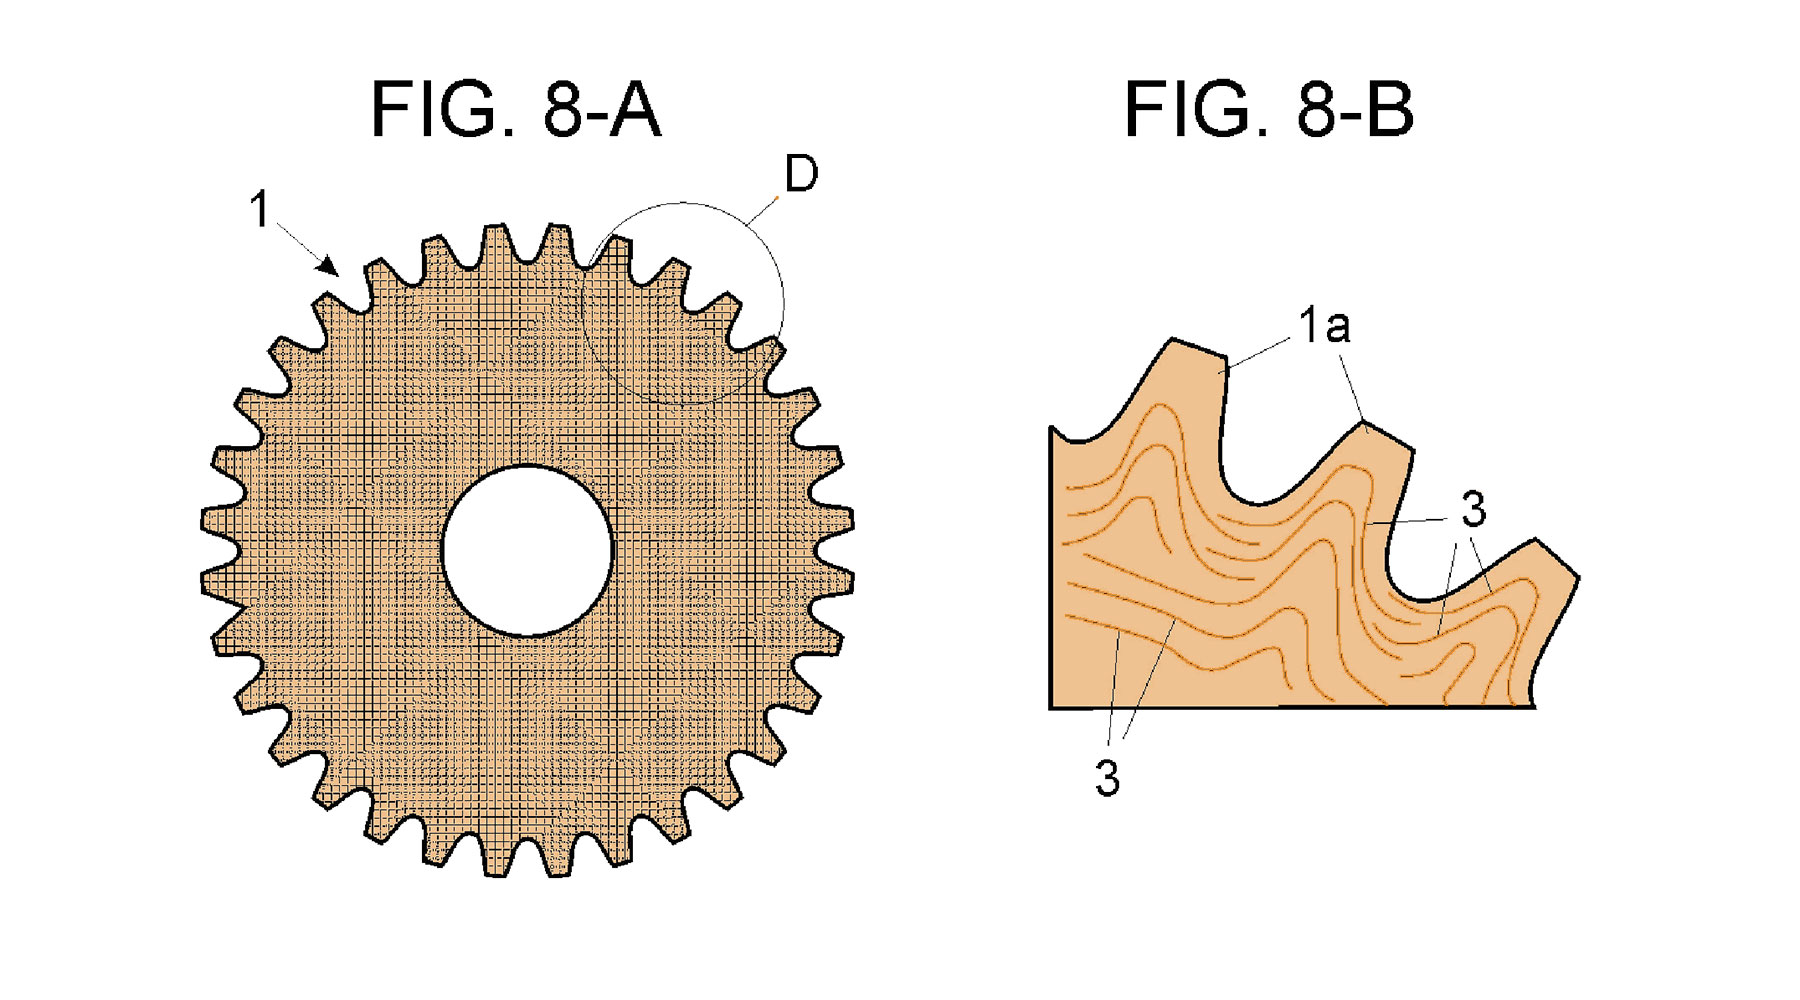 Gemini Rigel ultralight compression molded forged carbon 1x direct mount bike chainrings, patent illustrations